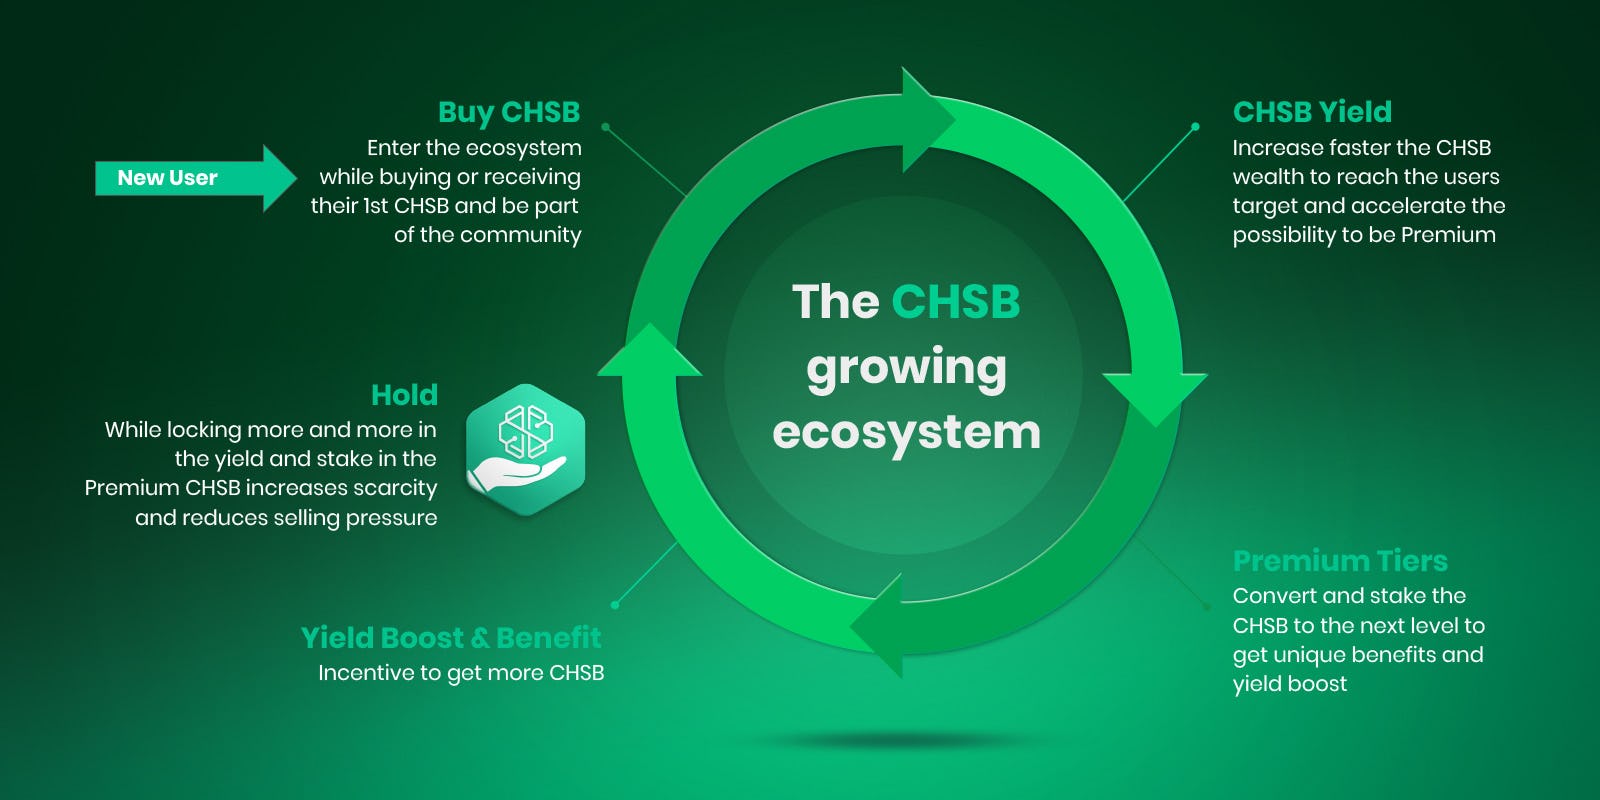 The CHSB growing ecosystem 